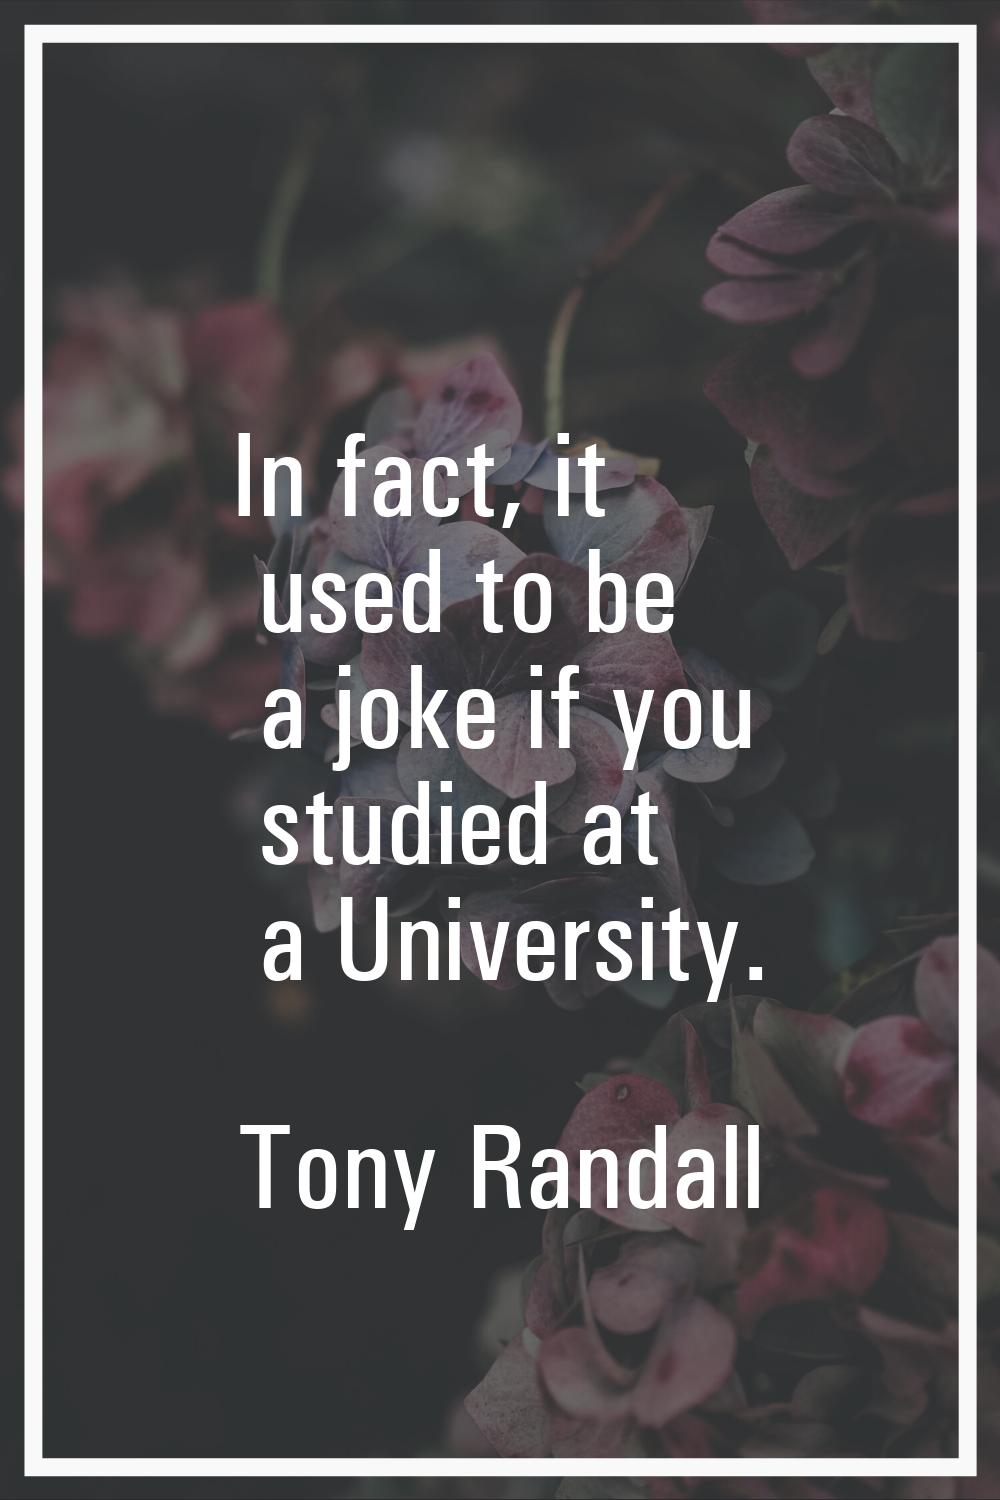 In fact, it used to be a joke if you studied at a University.